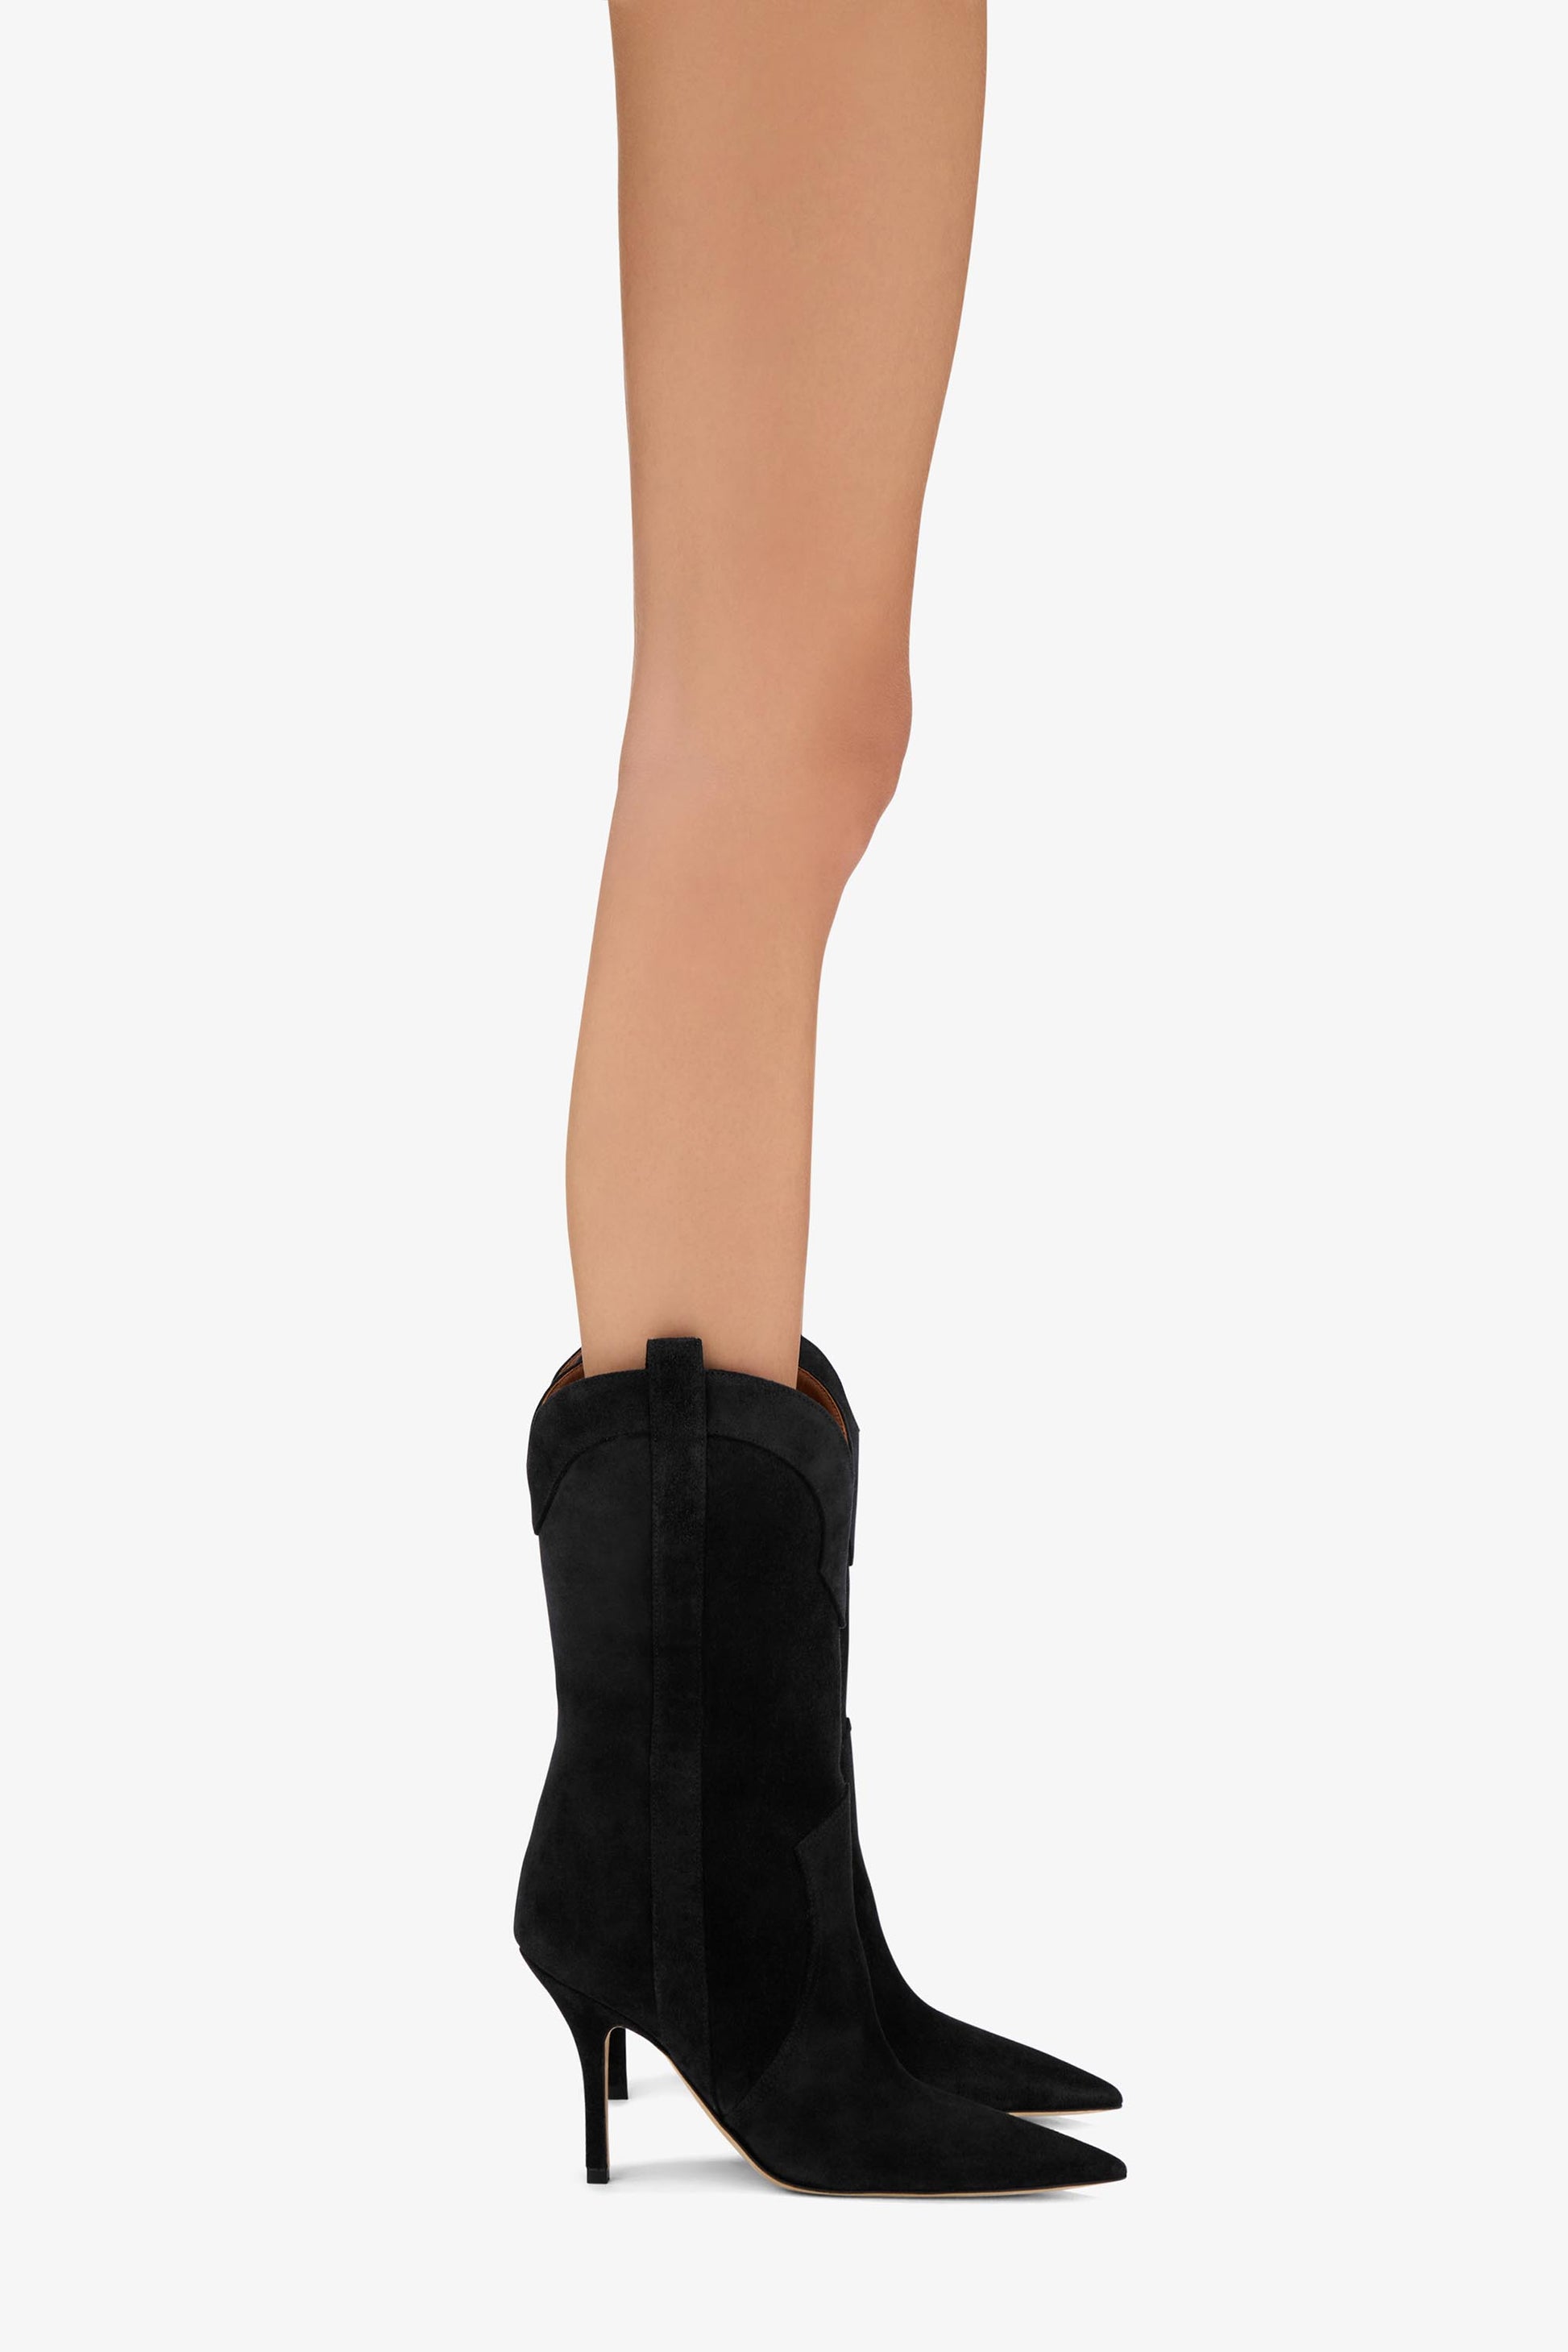 Black suede mid-calf boot - Product worn